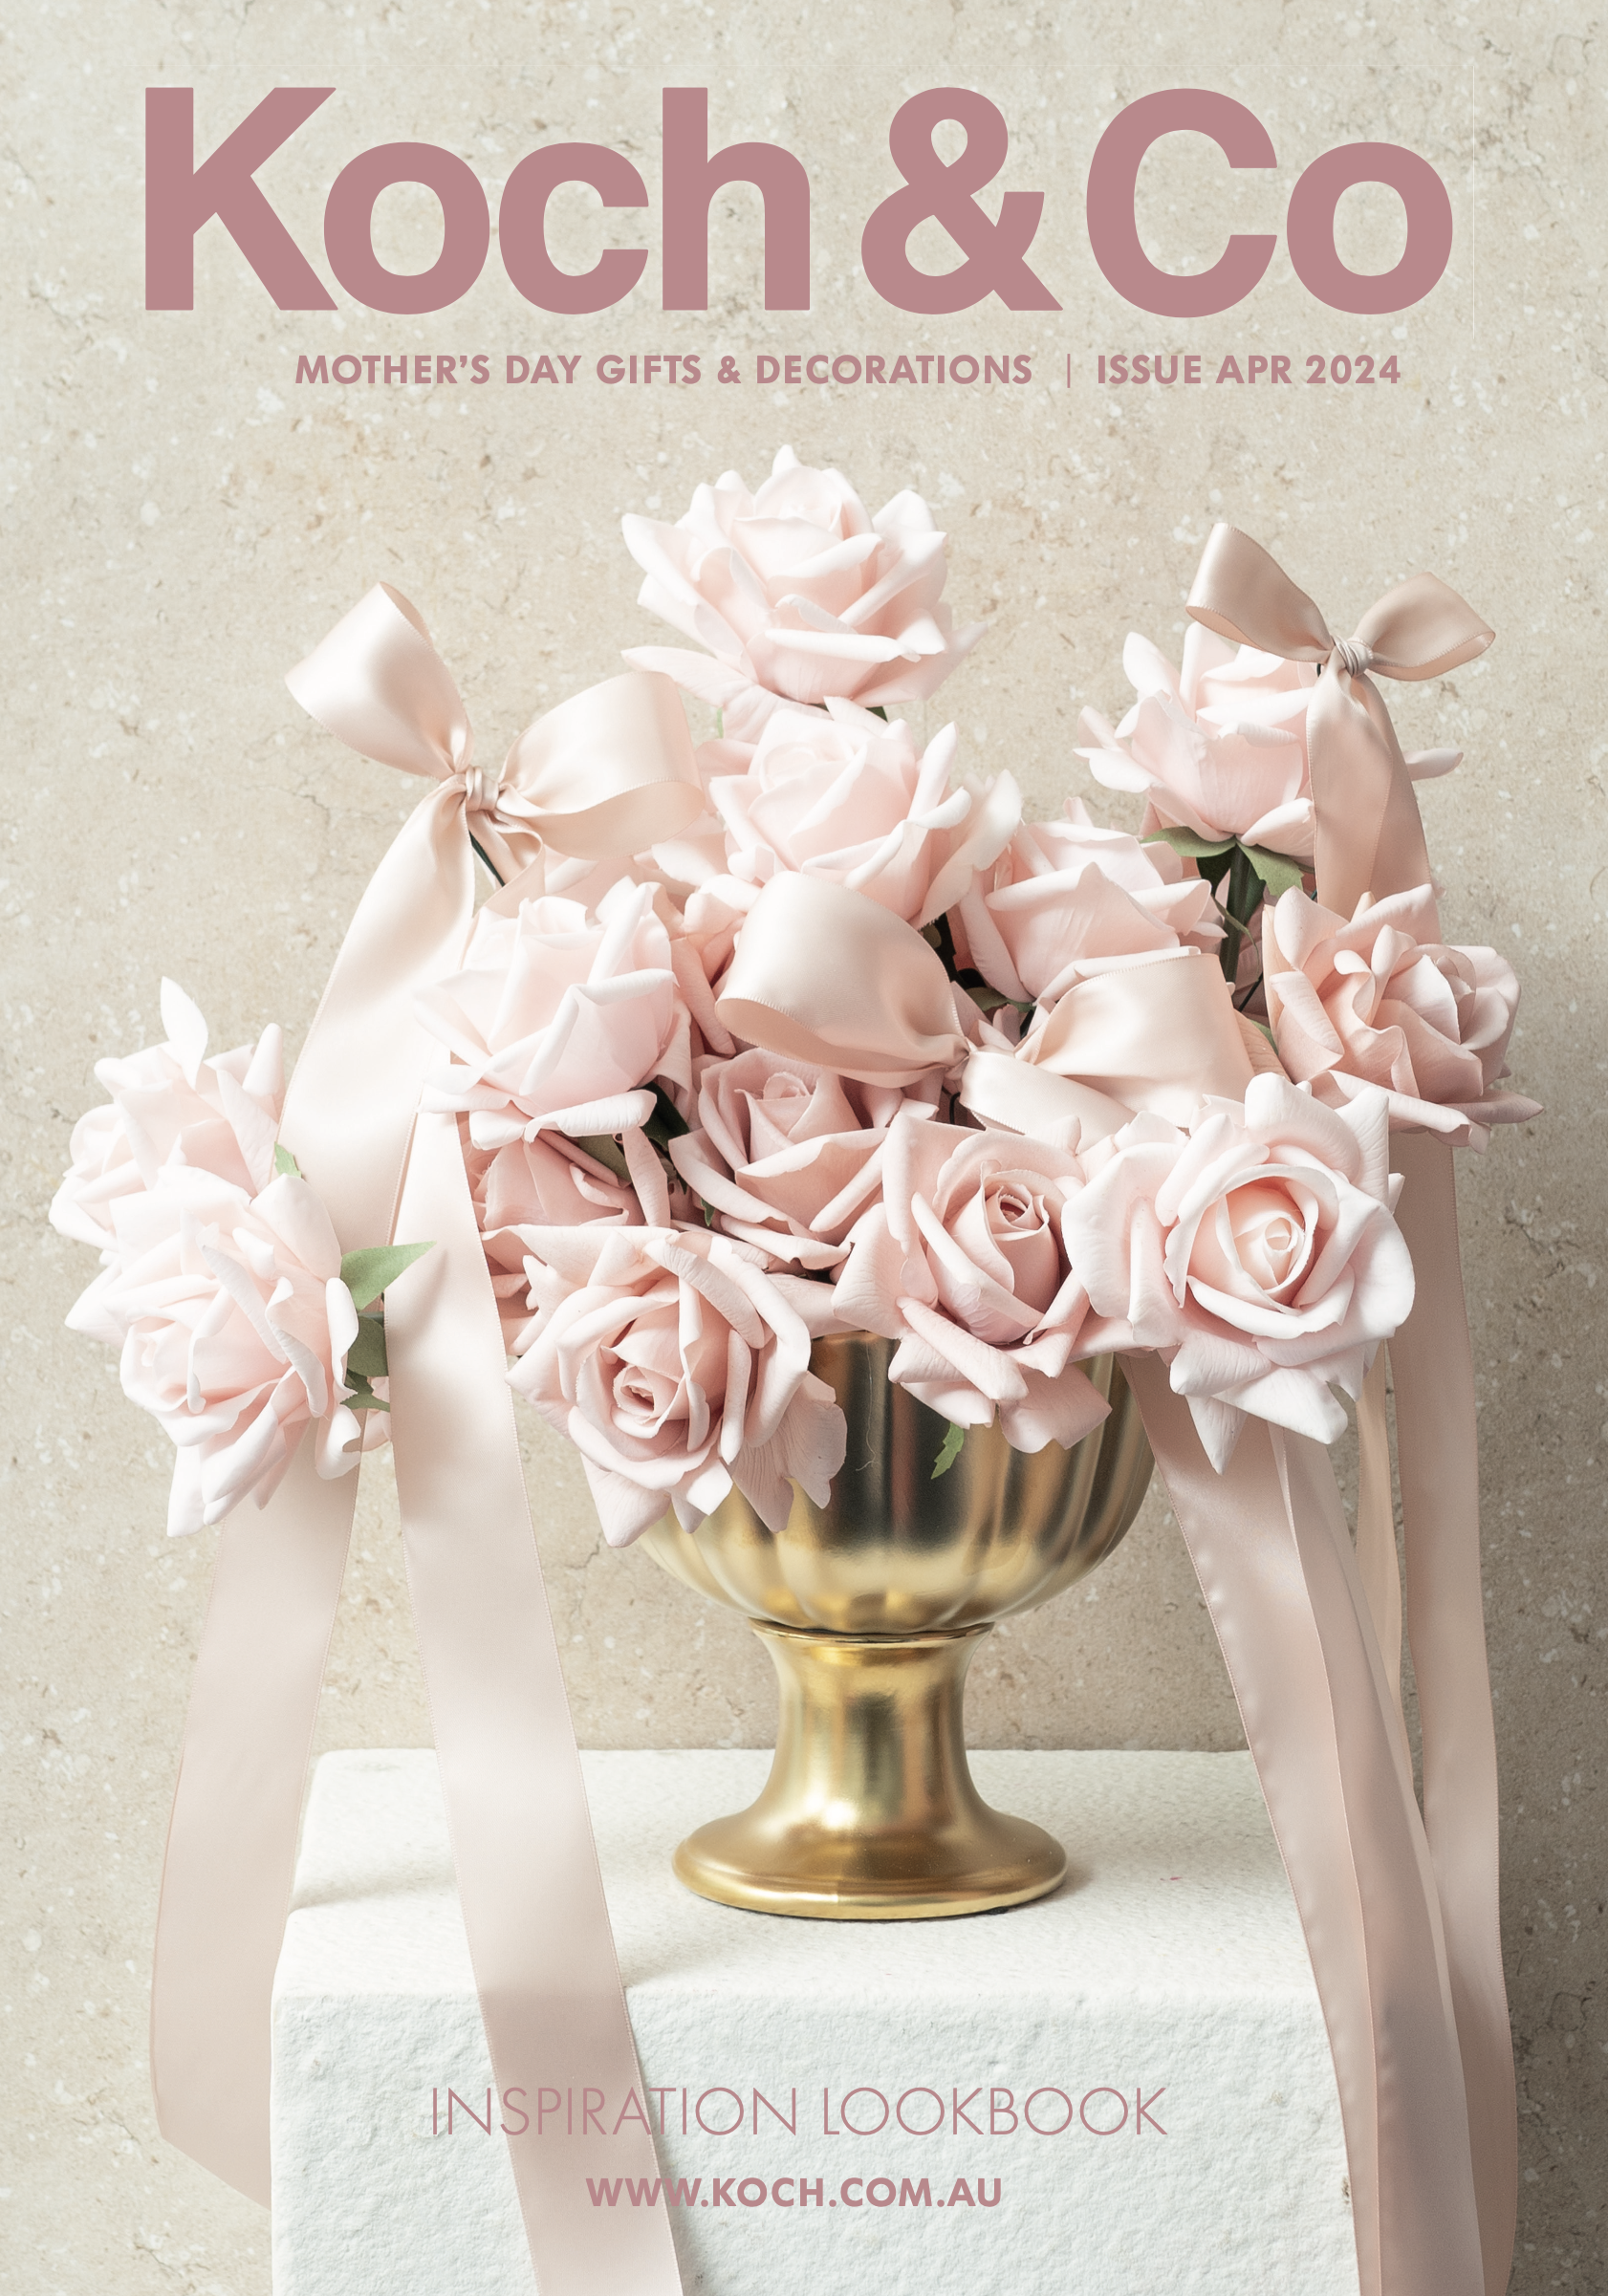 Celebrate Mum: Browse our Mother's Day Collection